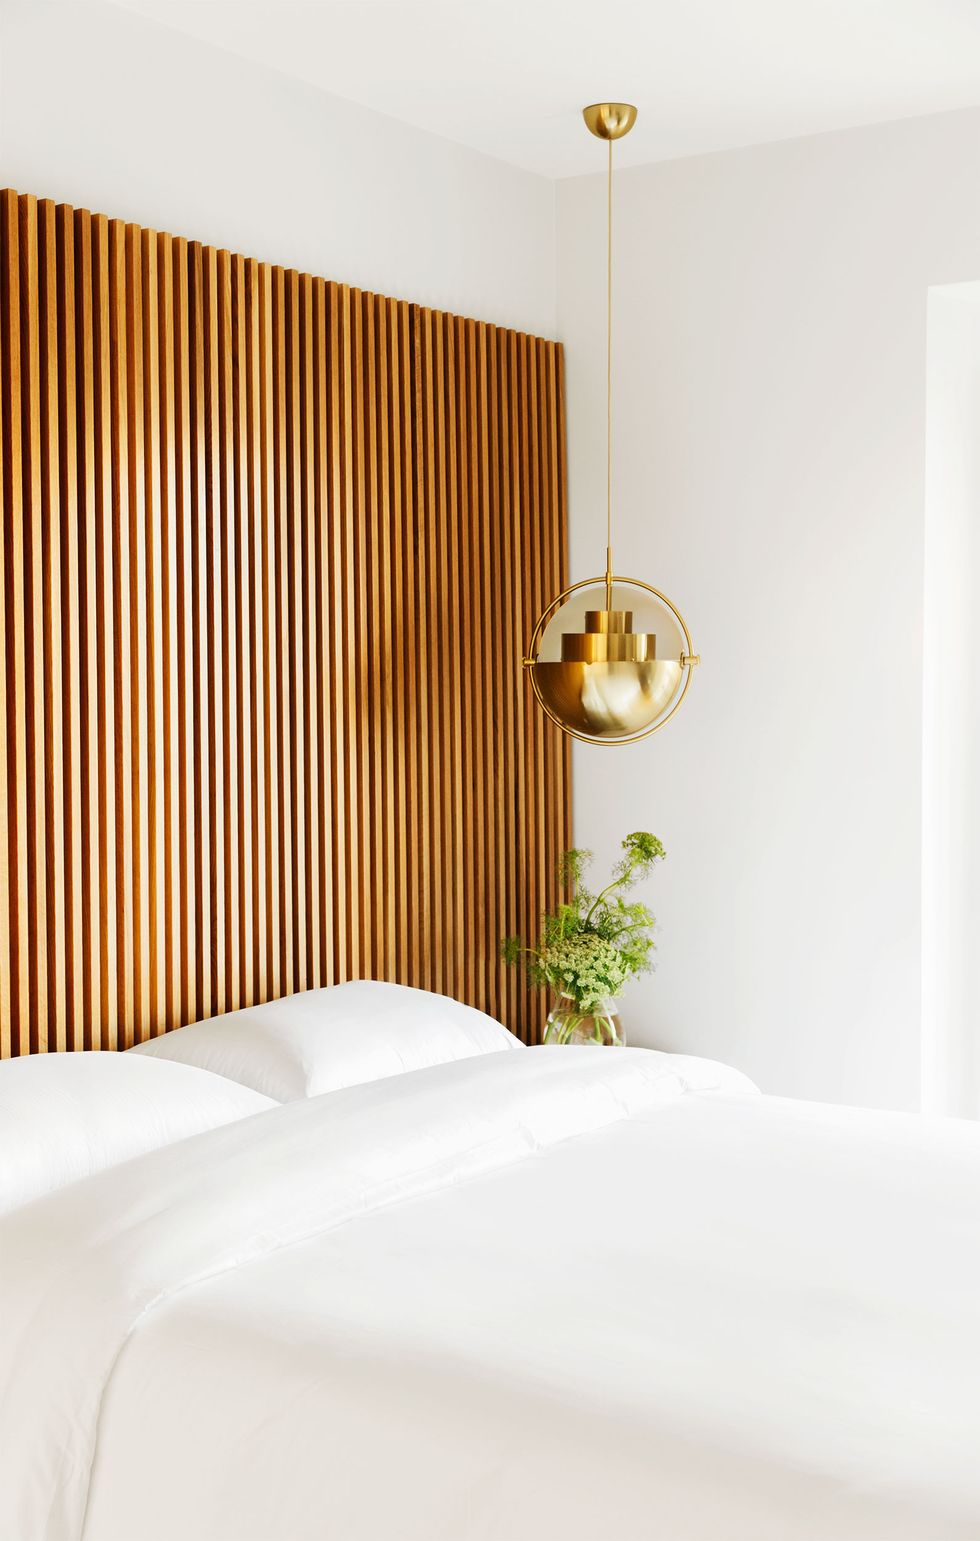 in the corner of a bedroom the walls and bedding are white, wooden slats line the wall behind the bed, beside it is a glass vase with light colored ferns and flowers, and above it is a spherical gold pendant